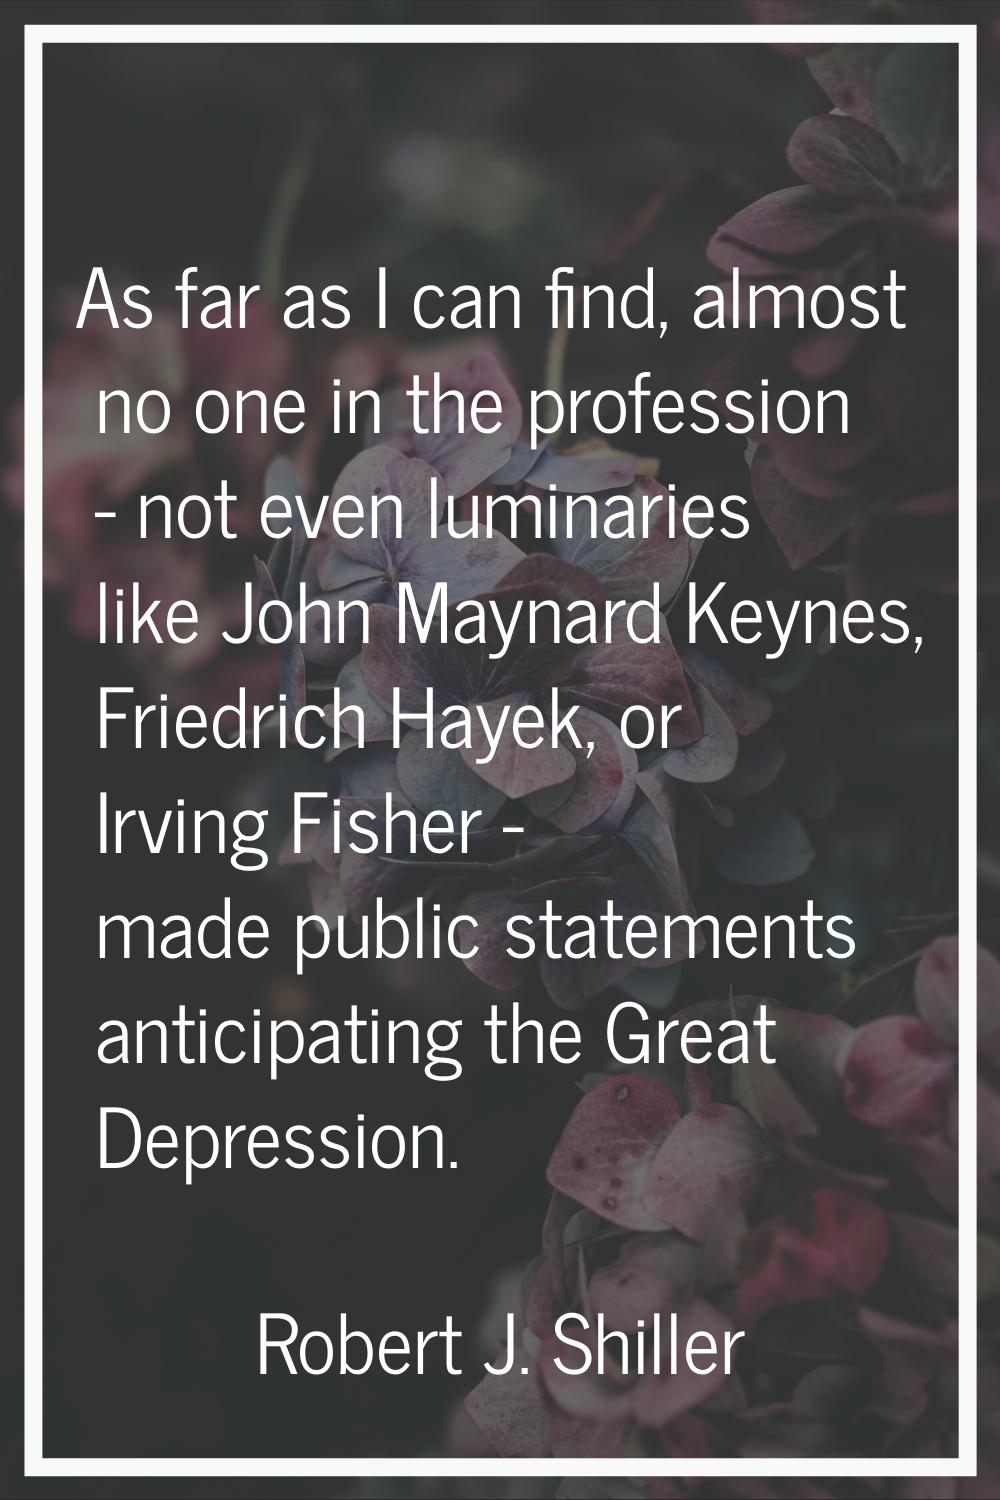 As far as I can find, almost no one in the profession - not even luminaries like John Maynard Keyne